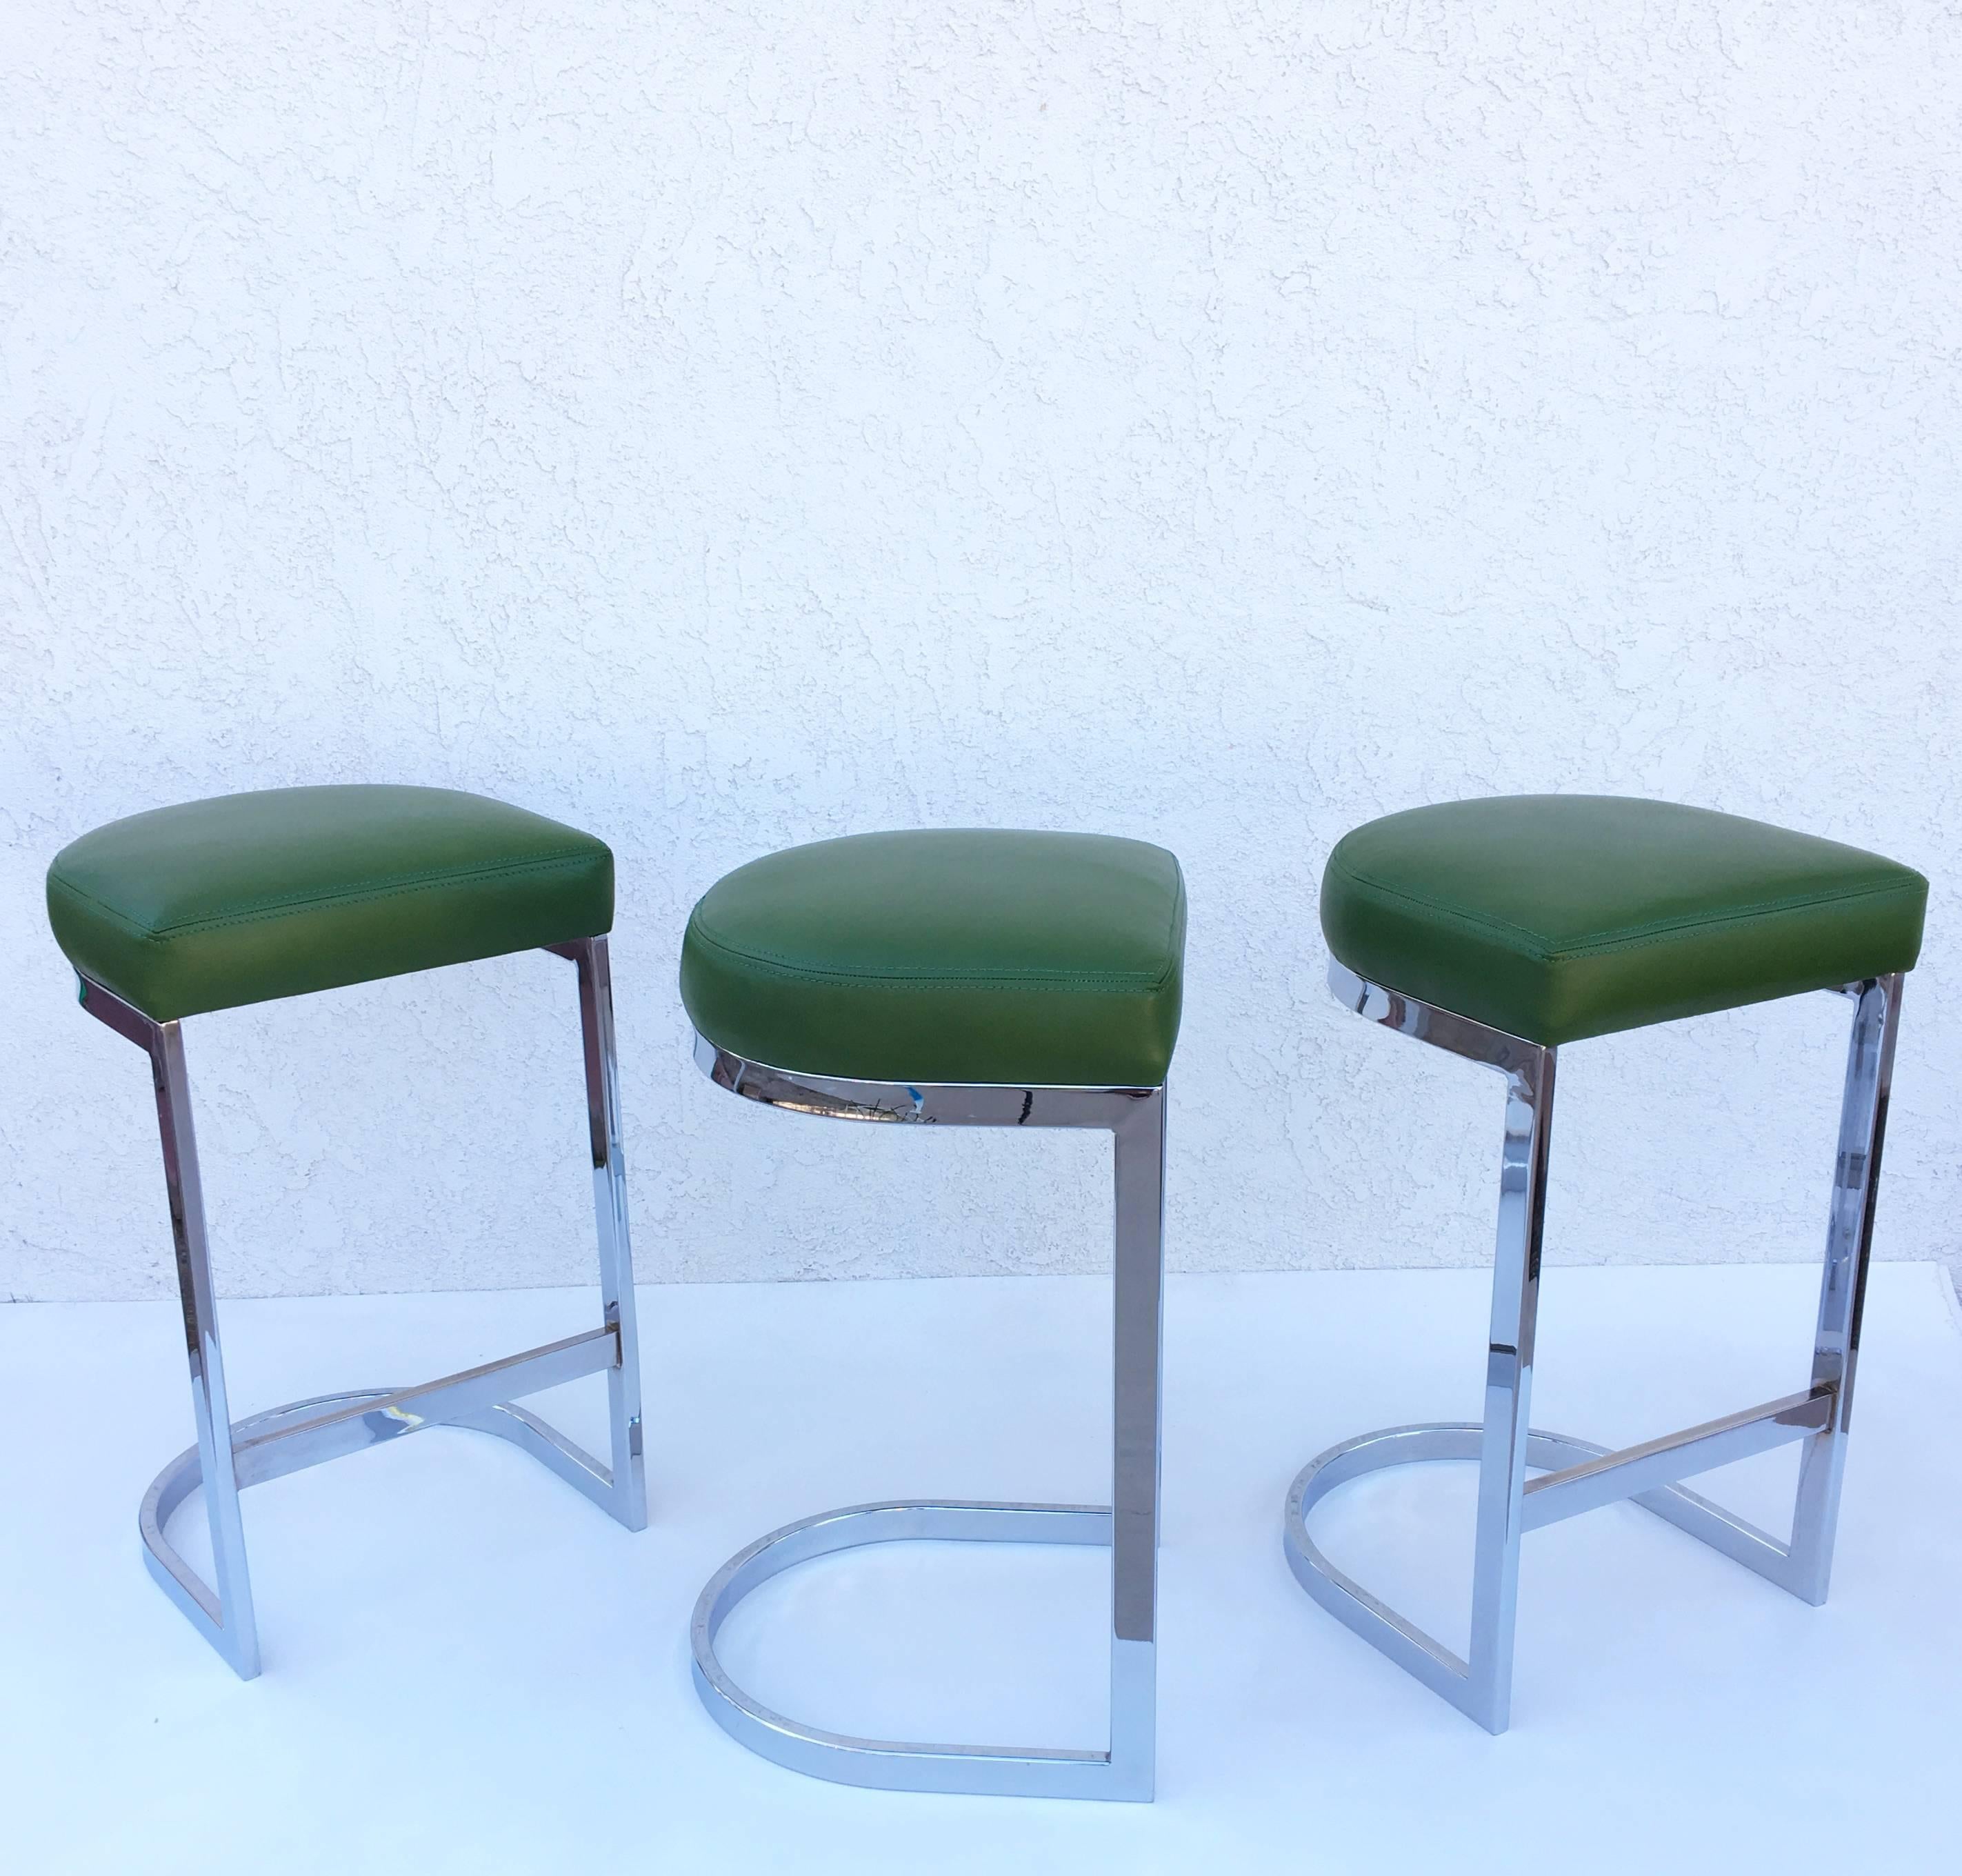 Mid-20th Century Set of Three Chrome and Leather Cantilever Bar Stools by Milo Baughman